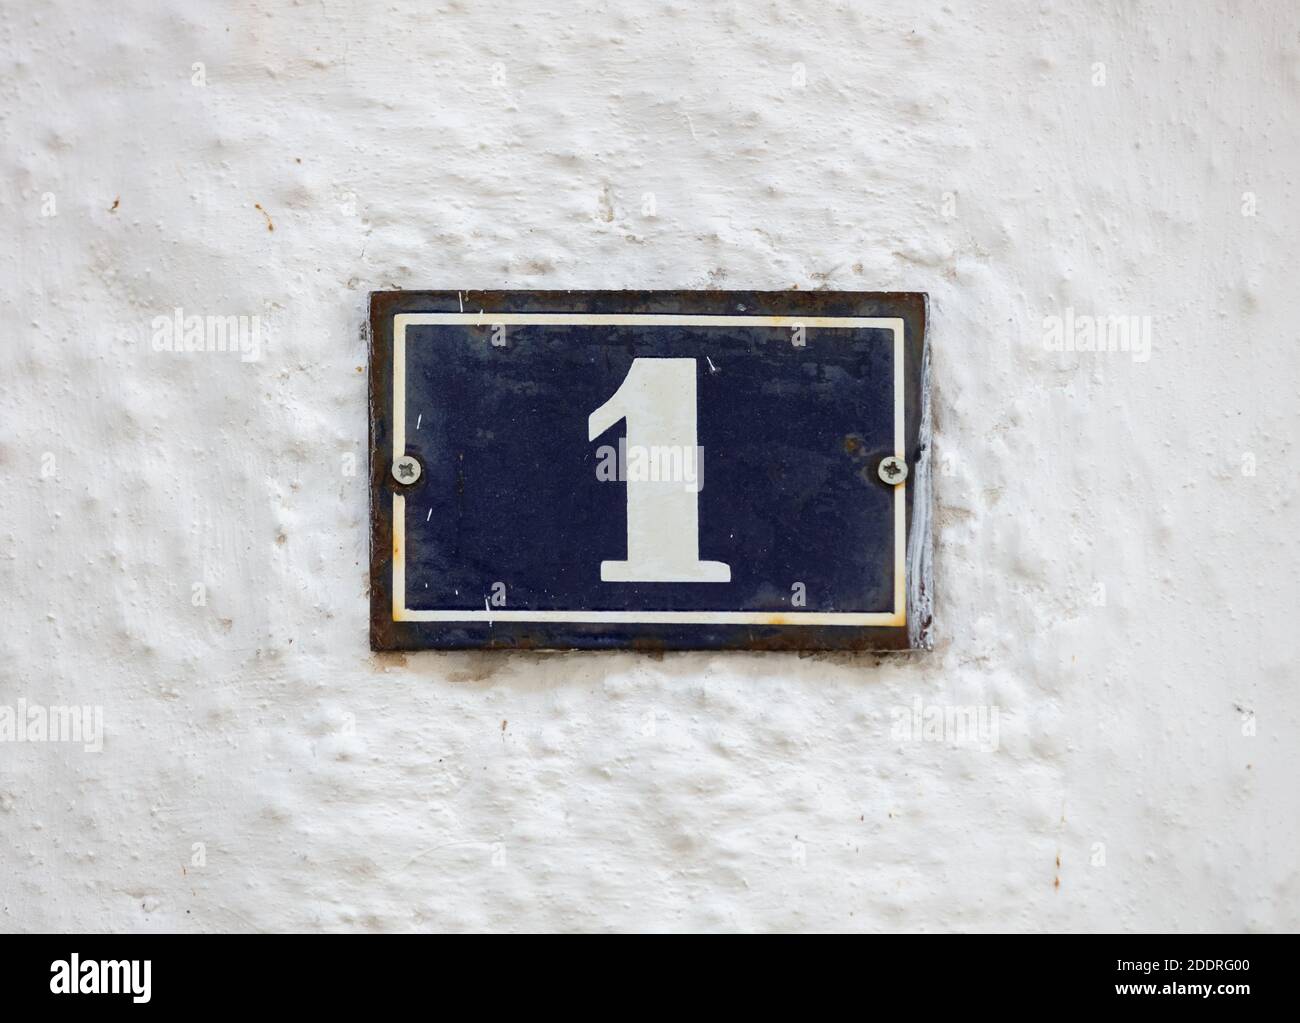 Street number one. Digit 1 on metal vintage plate mounted on whitewashed wall. Traditional house address Stock Photo